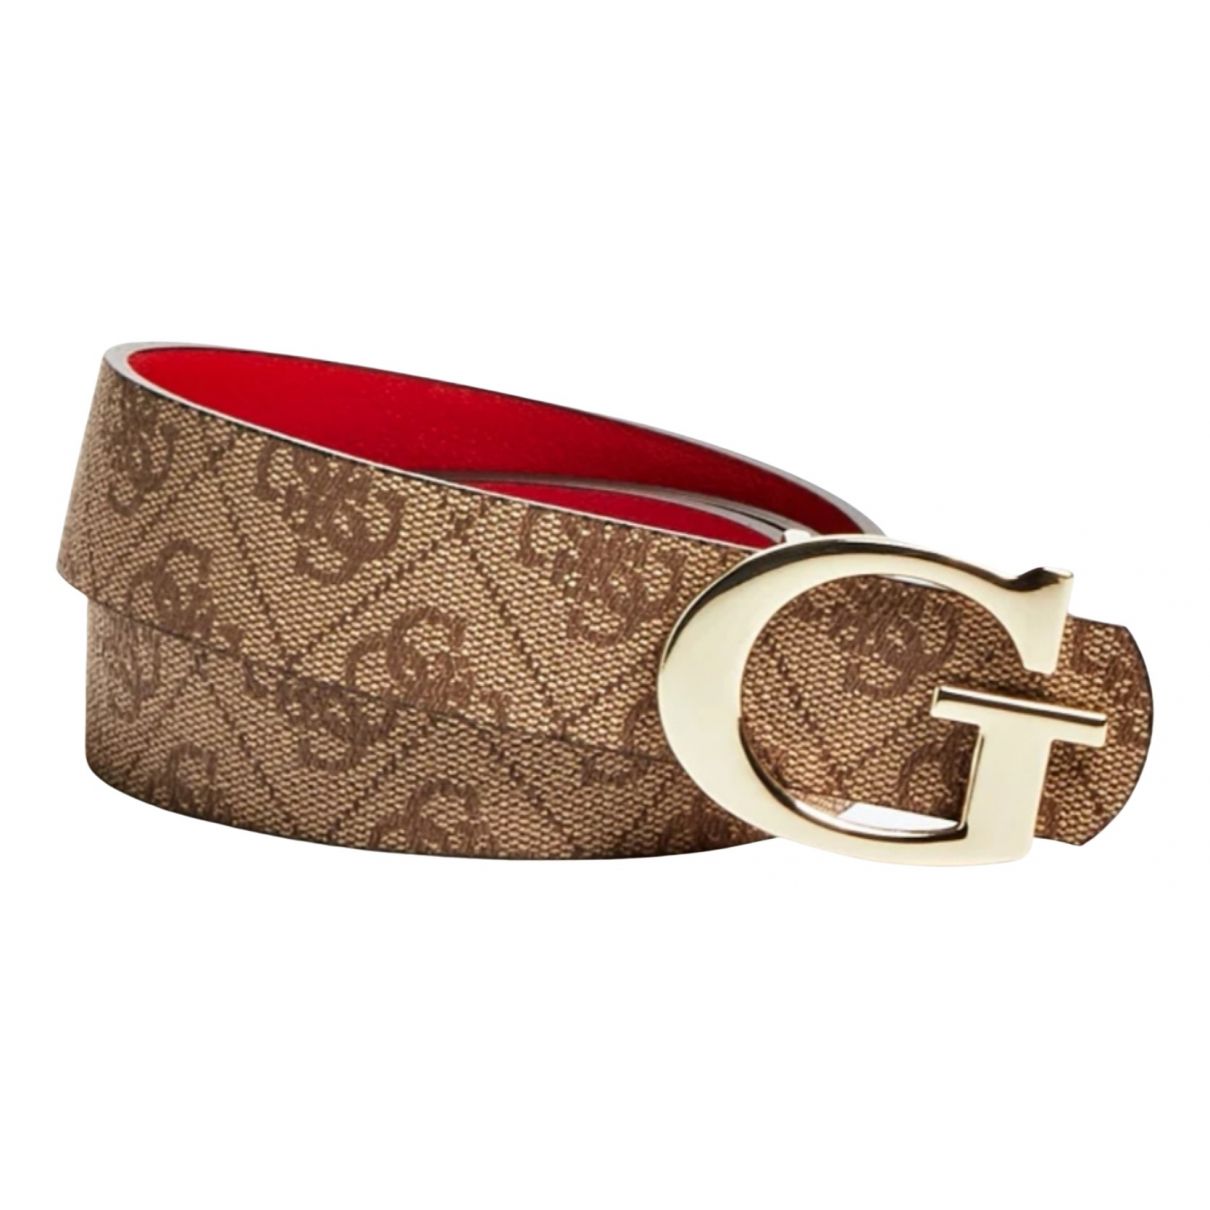 Guess Red Vegan leather Belts | Vestiaire Collective (Global)